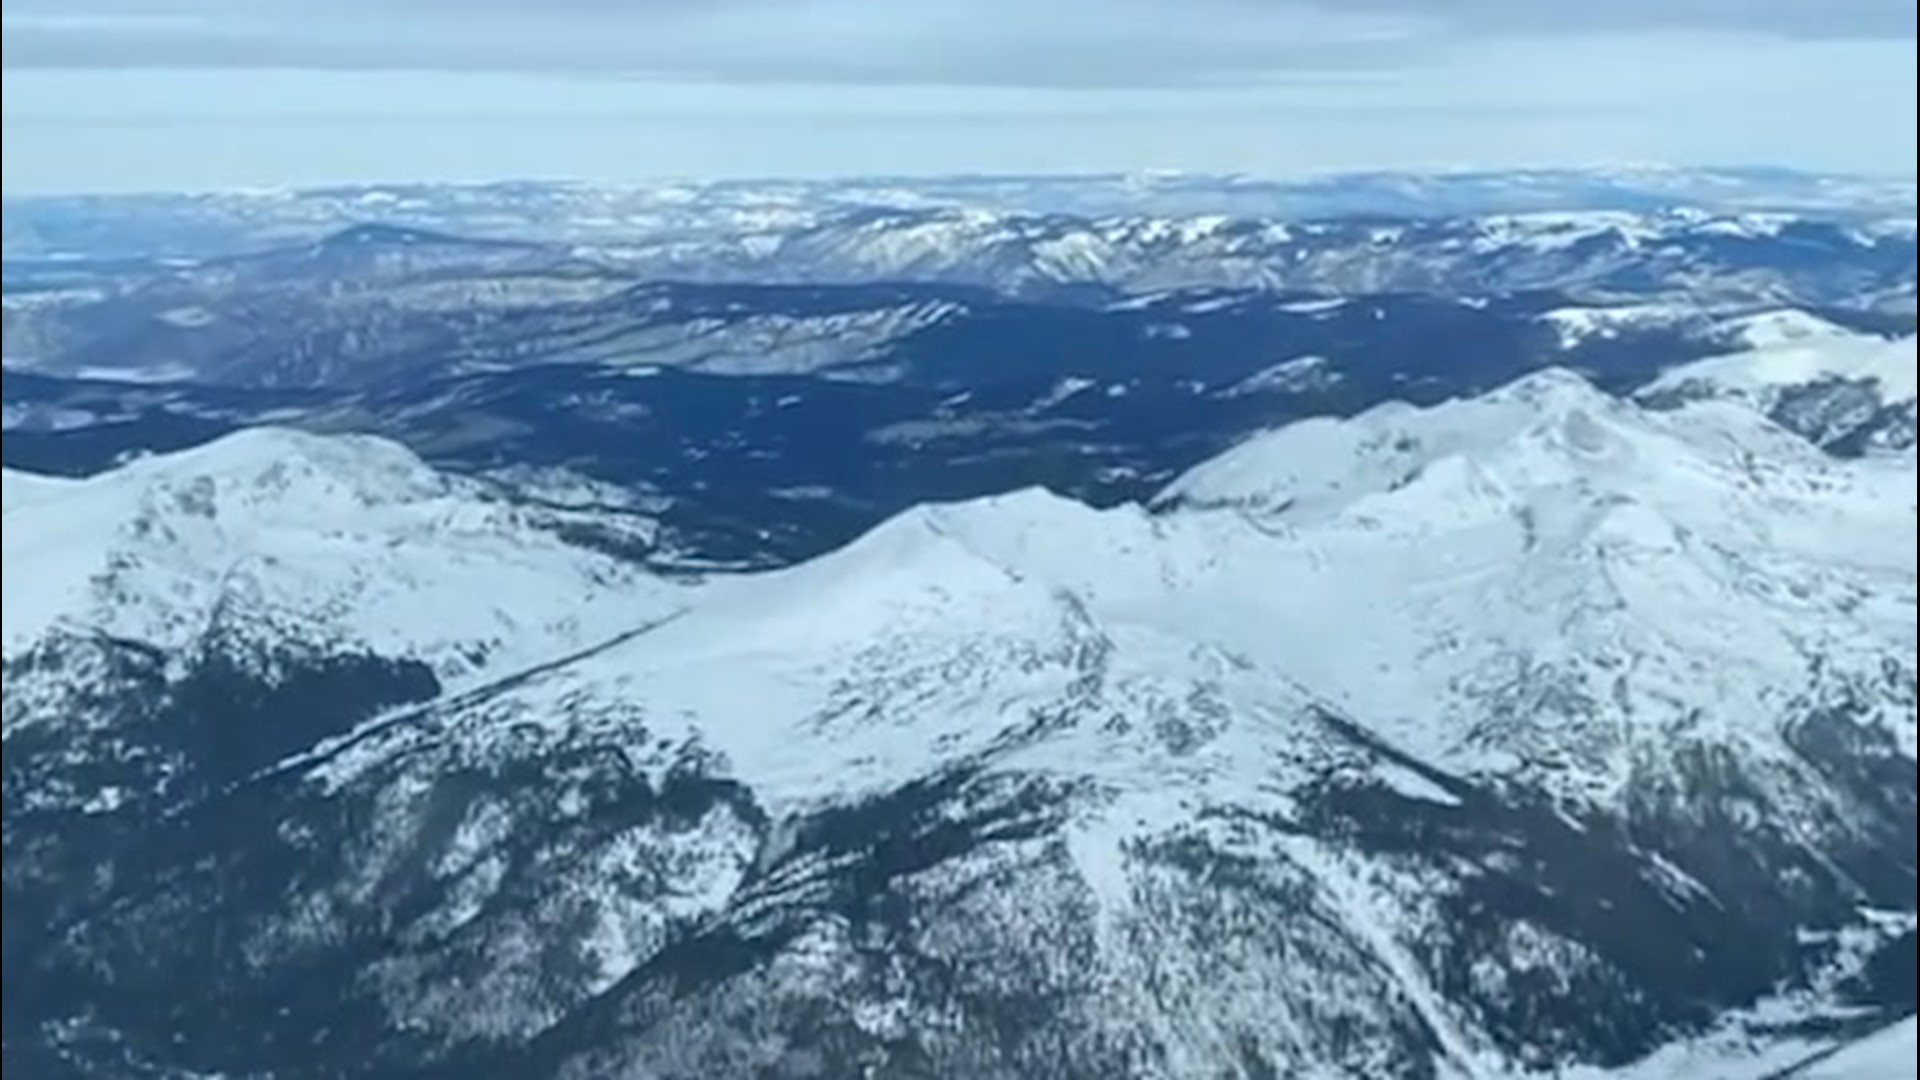 Enjoy this view of the Colorado Rockies coated in snow from a pilot's trip down to the runway in Aspen on Jan. 14.